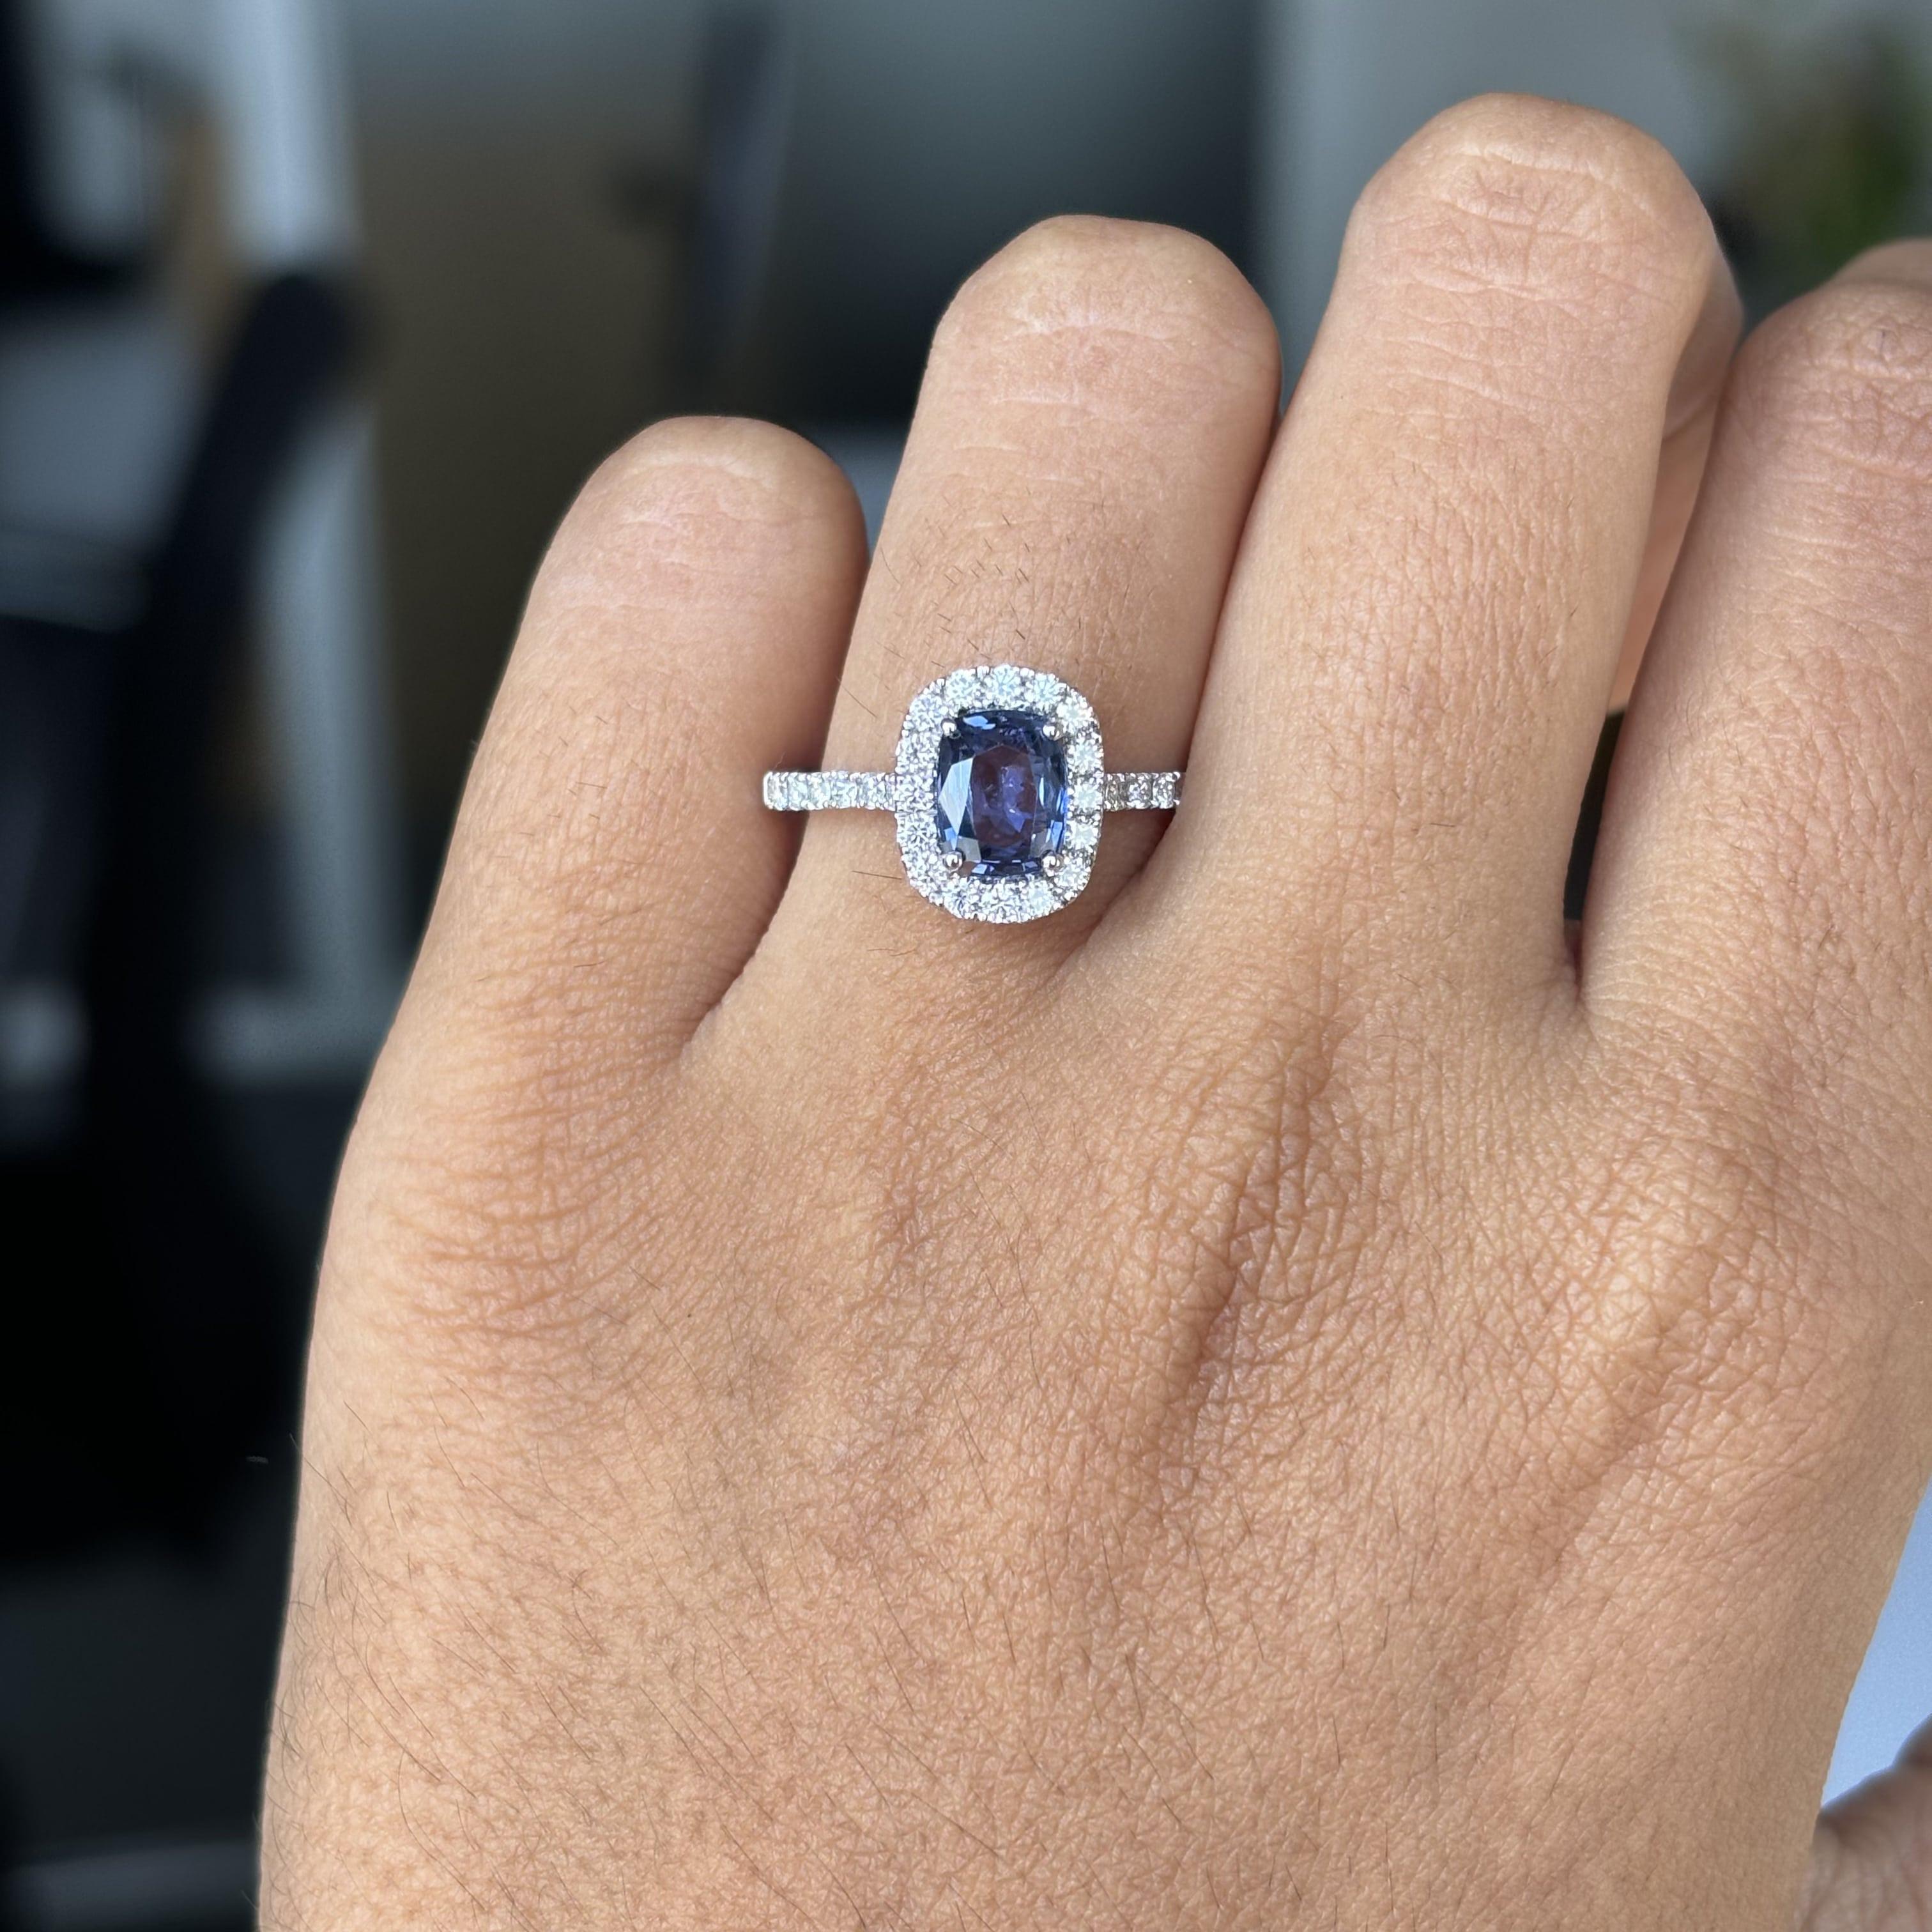 1.21 Carat Ceylon Blue Sapphire Ring with Halo Diamonds in 14K White Gold In New Condition For Sale In Bangkok, TH